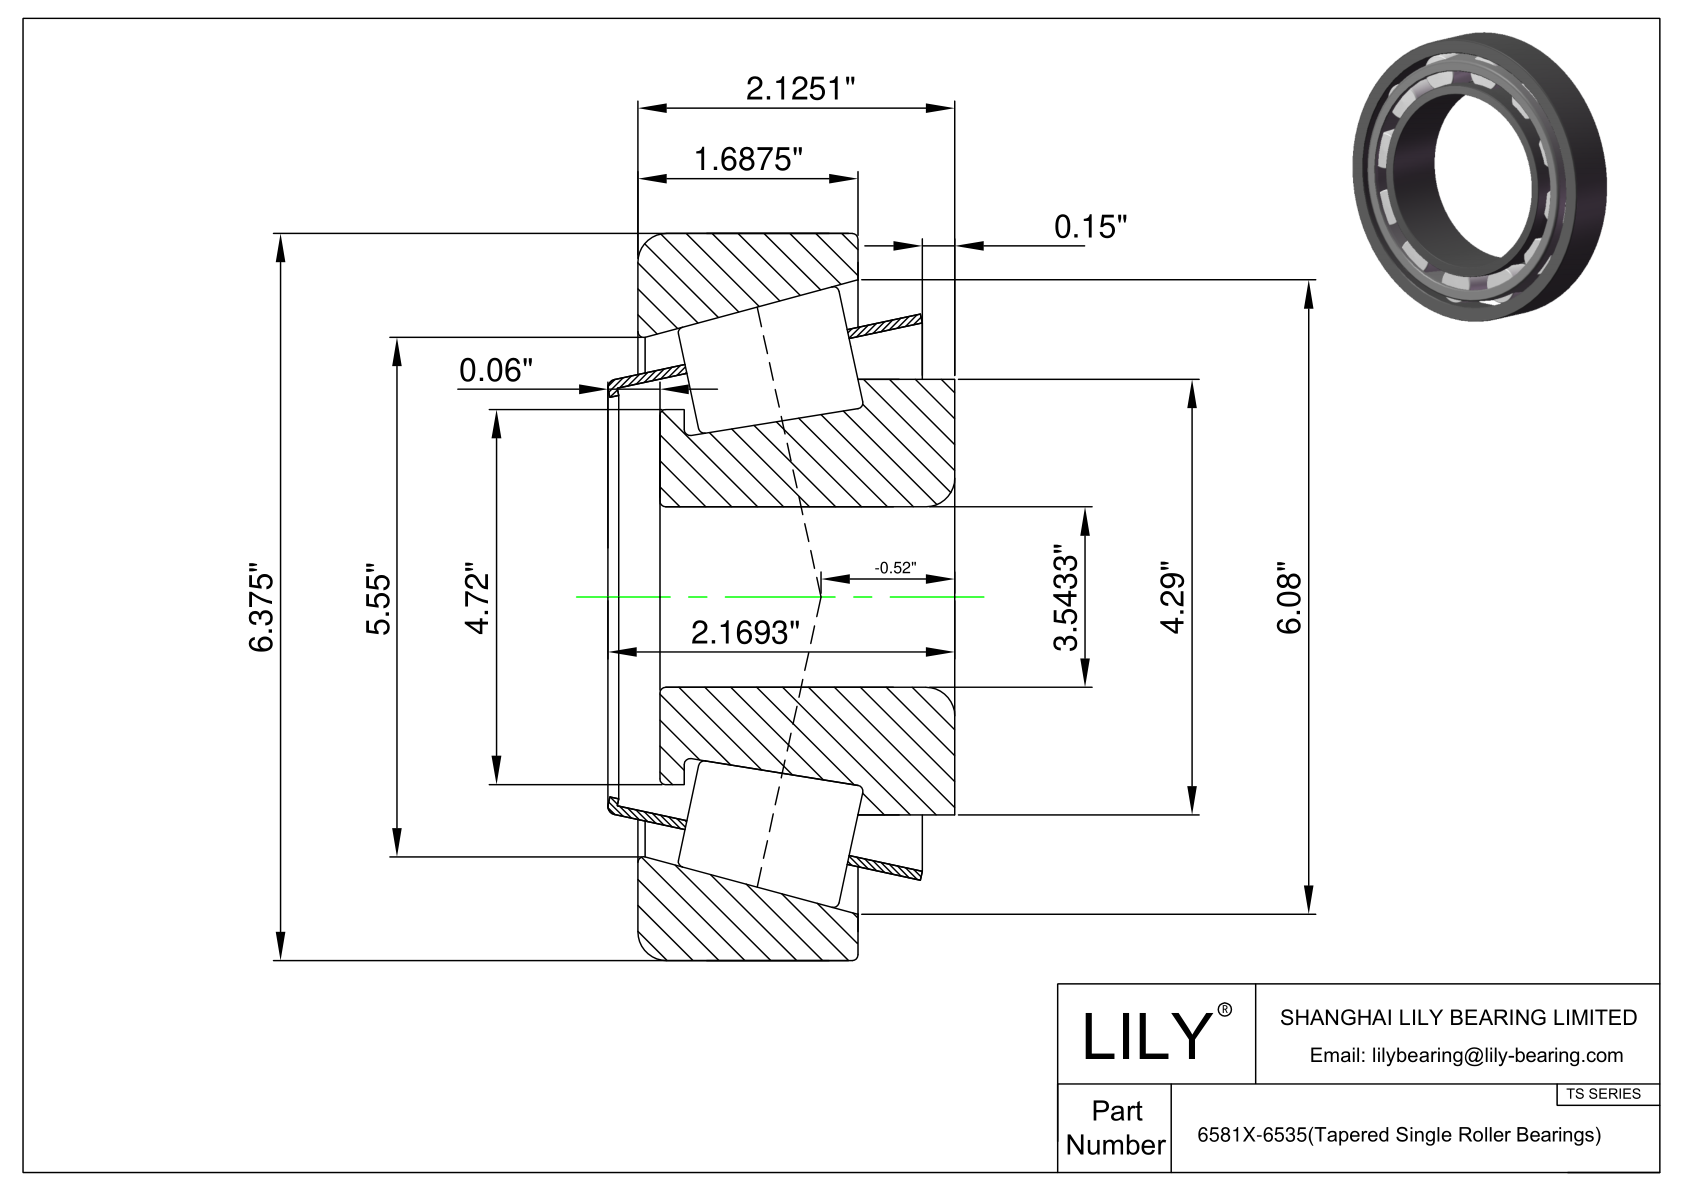 6581X-6535 TS (Tapered Single Roller Bearings) (Imperial) cad drawing